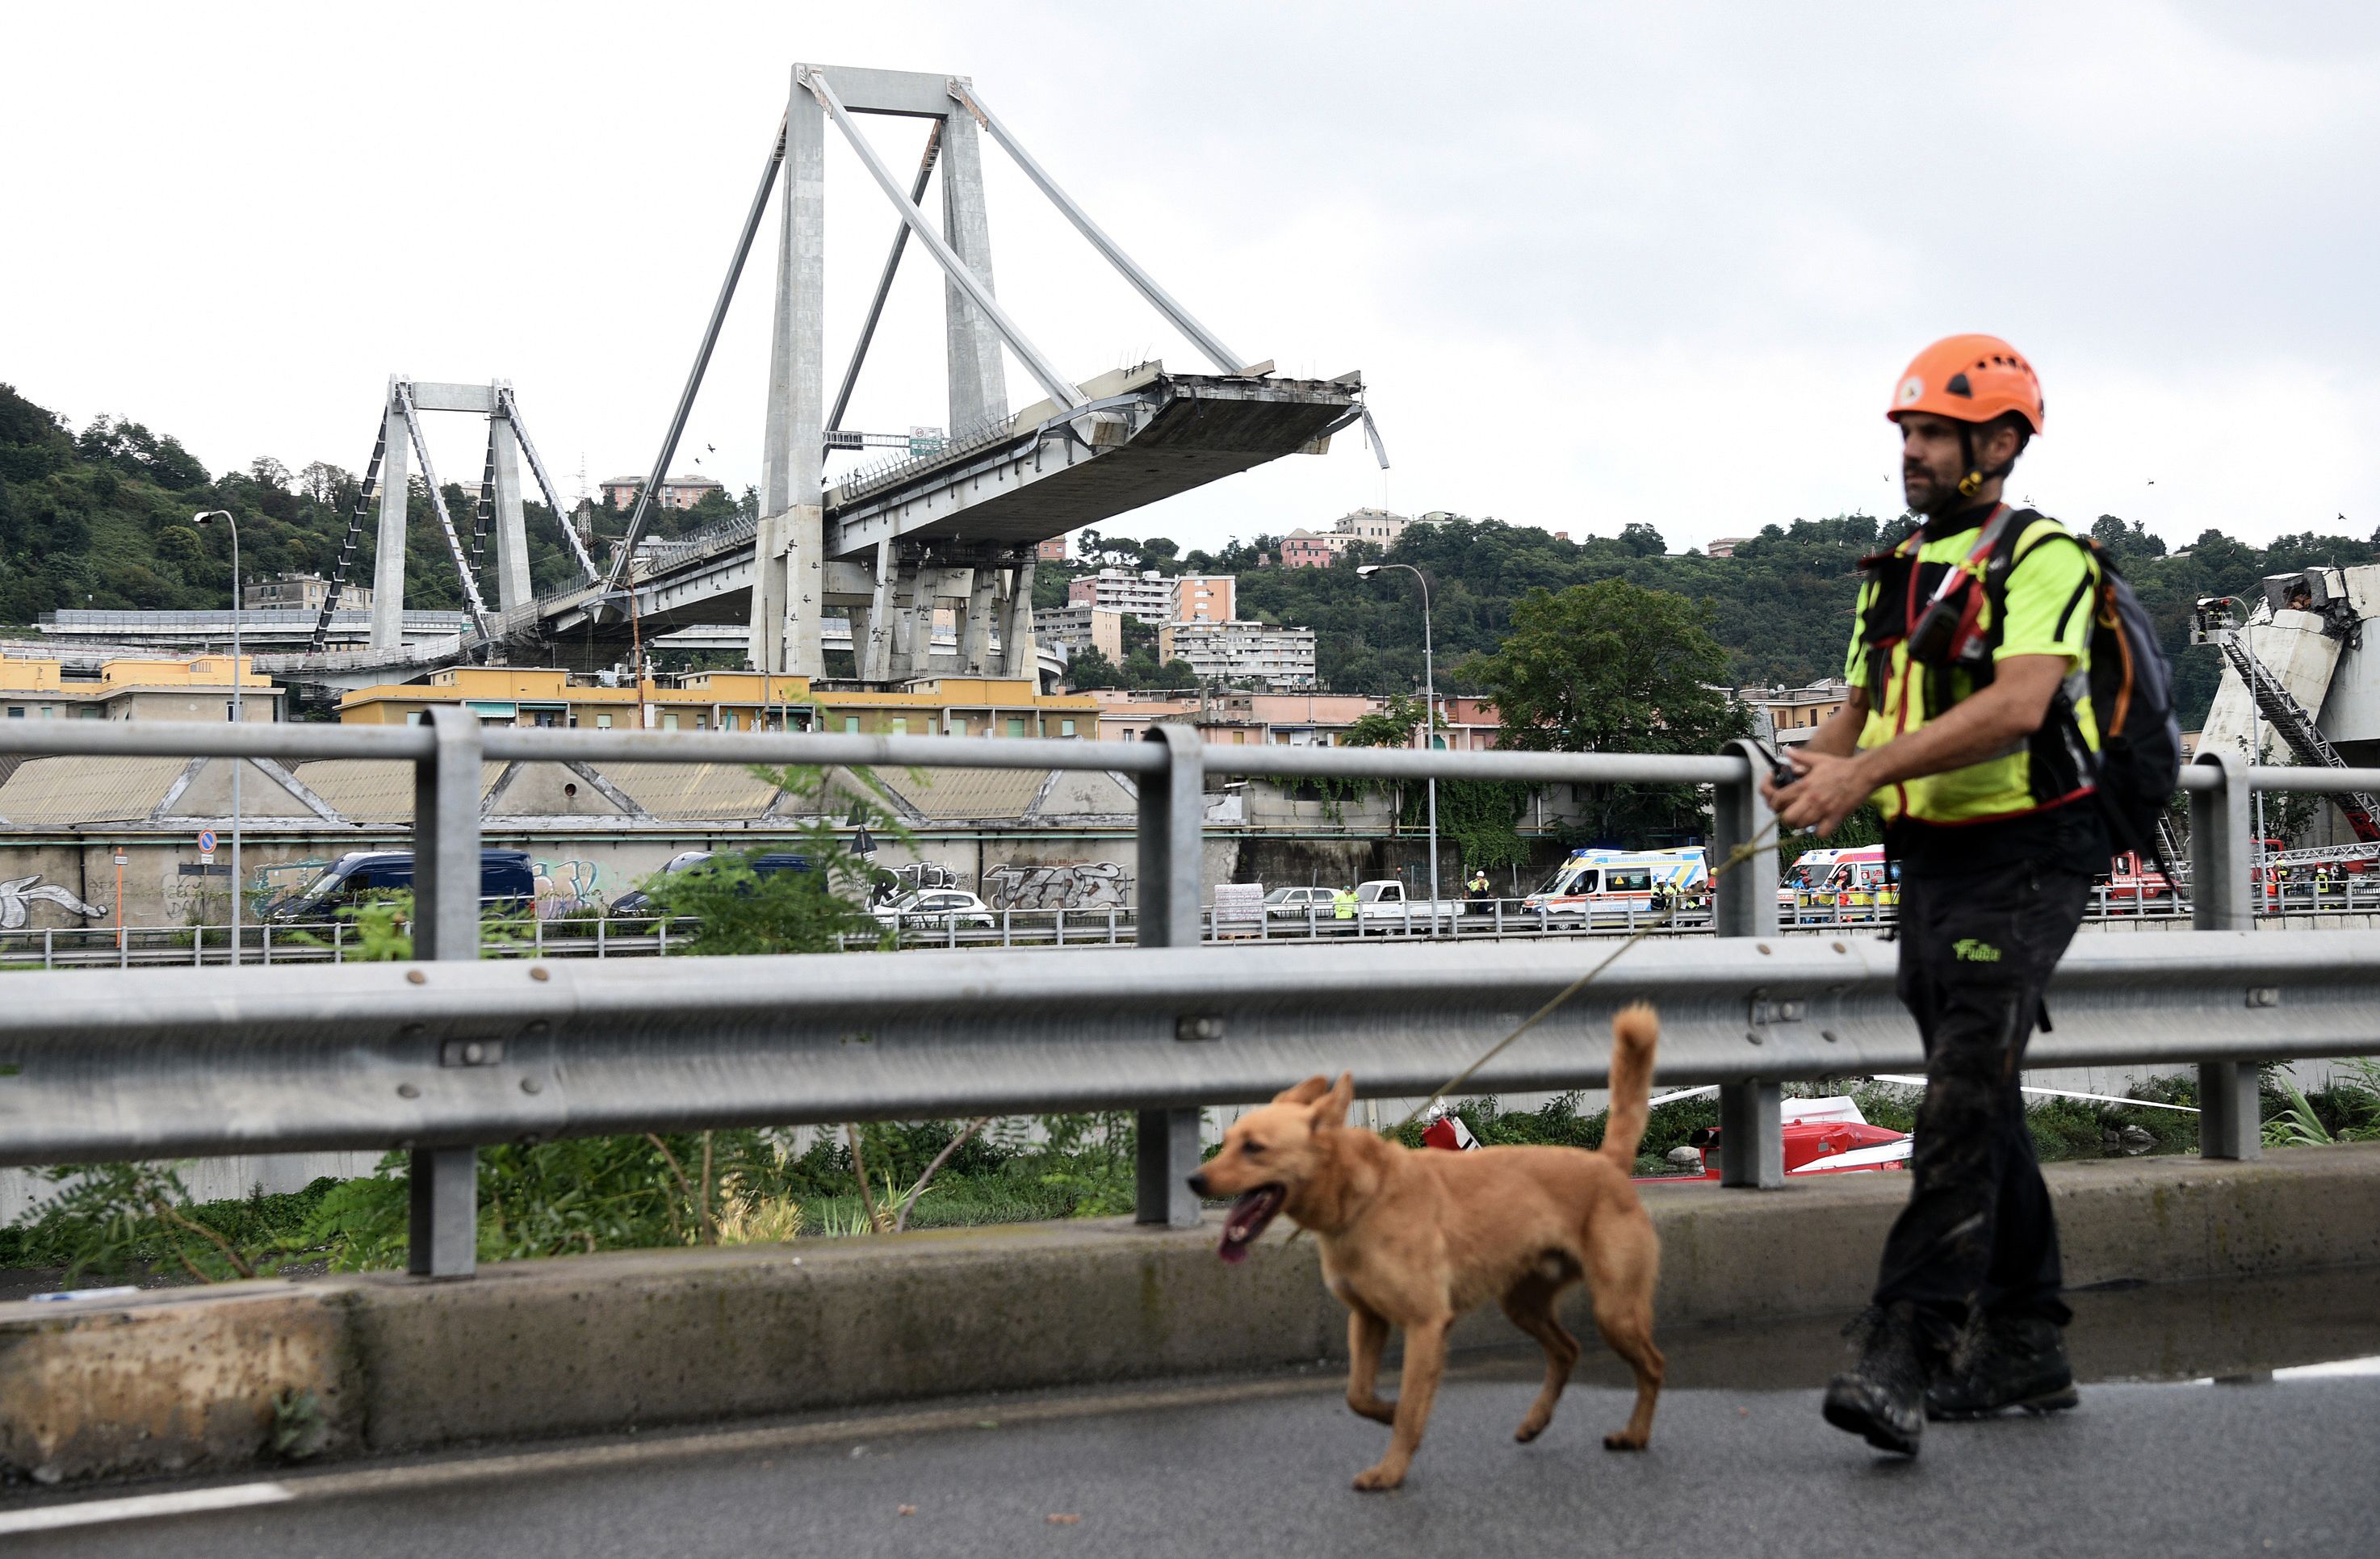 A rescuer walks with a dog near the Morandi motorway bridge after a section of the bridge collapsed earlier in Genoa on August 14, 2018. - At least 30 people were killed on August 14 when the giant motorway bridge collapsed in Genoa in northwestern Italy. The collapse, which saw a vast stretch of the A10 freeway tumble on to railway lines in the northern port city, was the deadliest bridge failure in Italy for years, and the country's deputy transport minister warned the death toll could climb further. (Photo by PIERO CRUCIATTI / AFP)